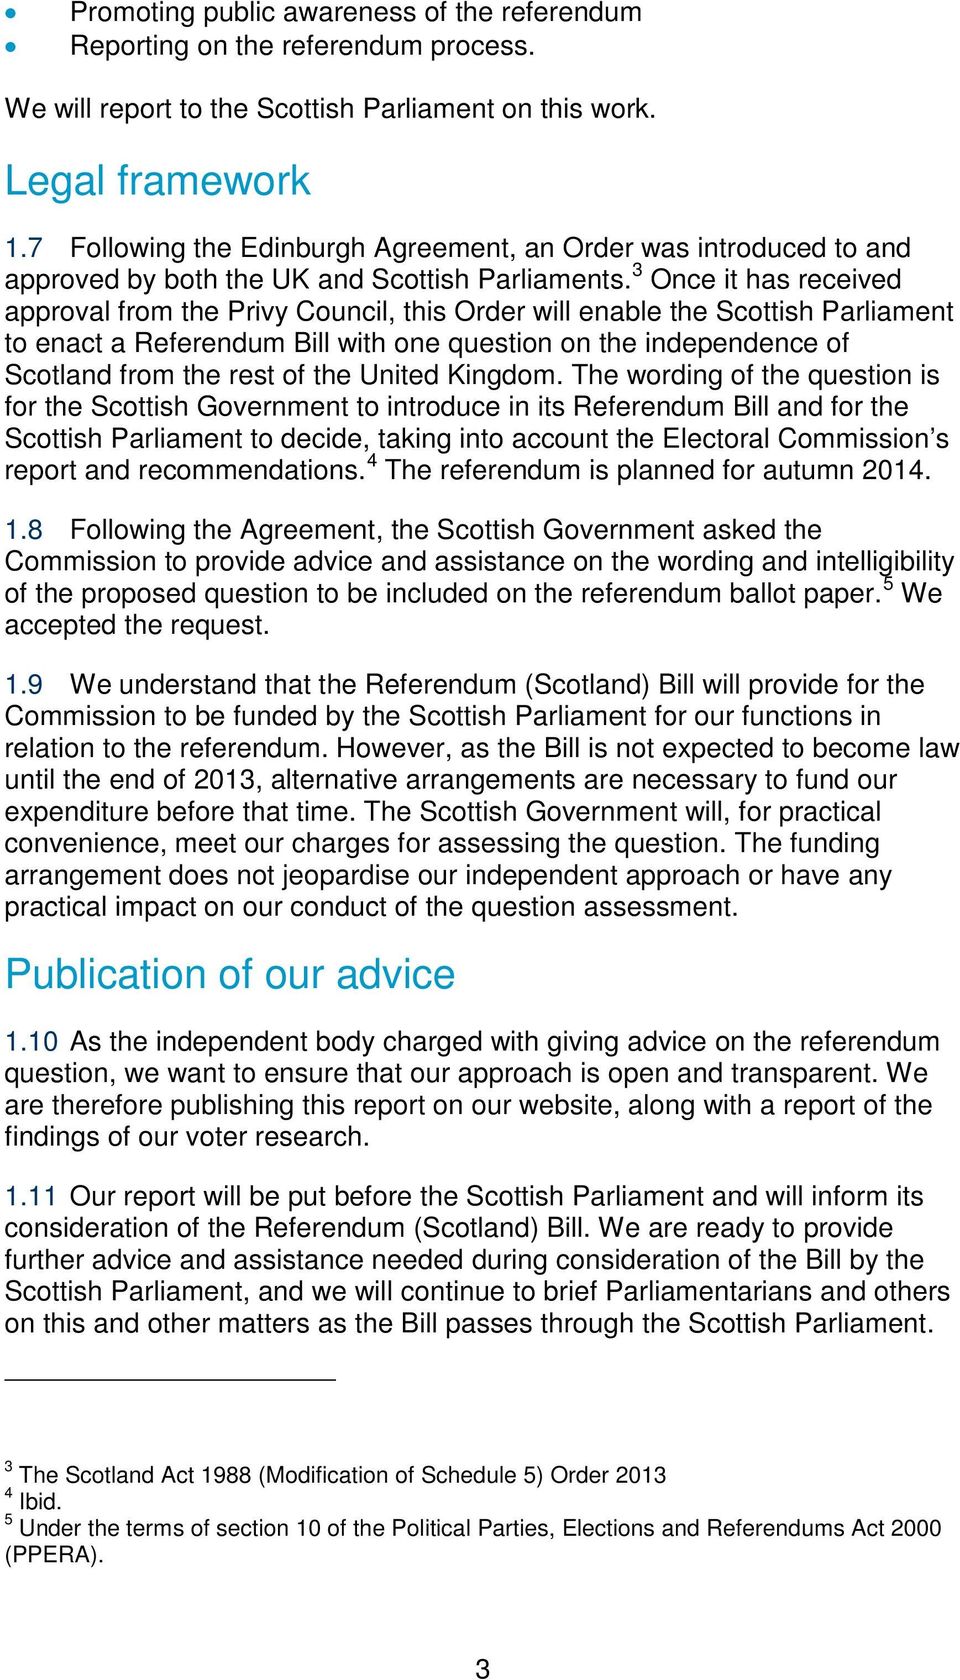 3 Once it has received approval from the Privy Council, this Order will enable the Scottish Parliament to enact a Referendum Bill with one question on the independence of Scotland from the rest of